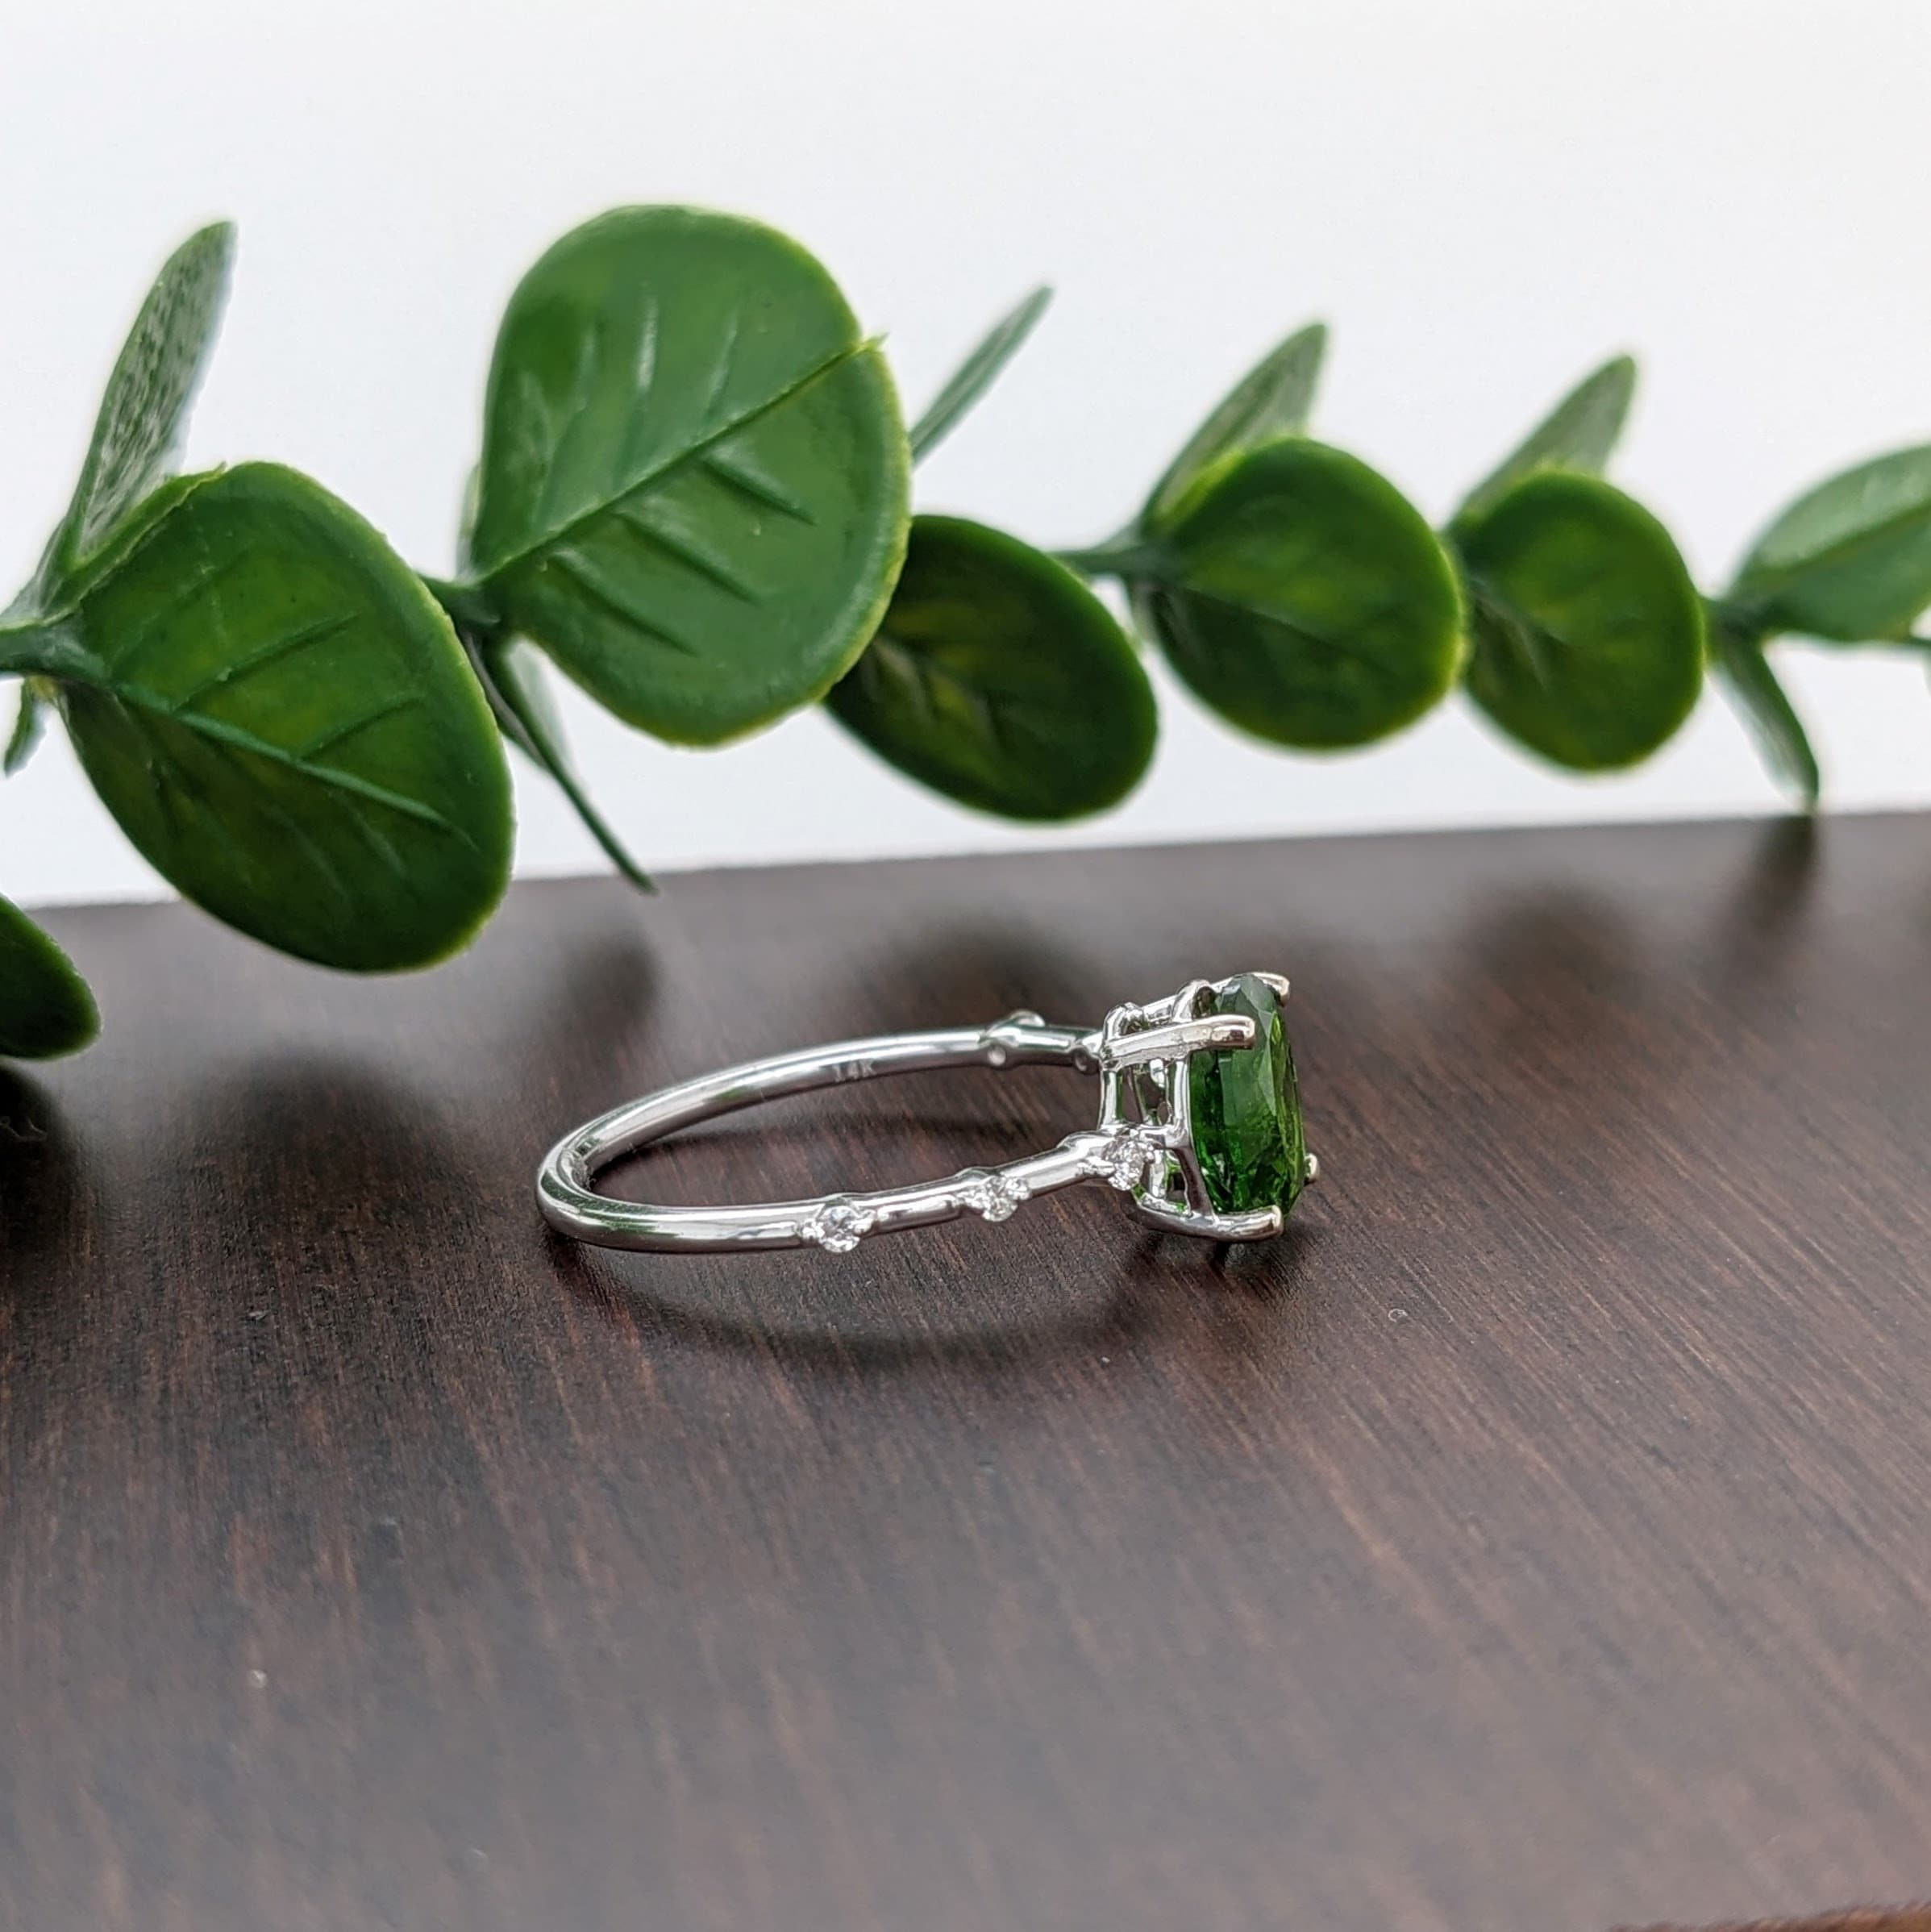 Minimalist Green Tsavorite Ring with All Natural Diamond Accents in Solid 14k White Gold | Dainty | Green Garnet | January Birthstone